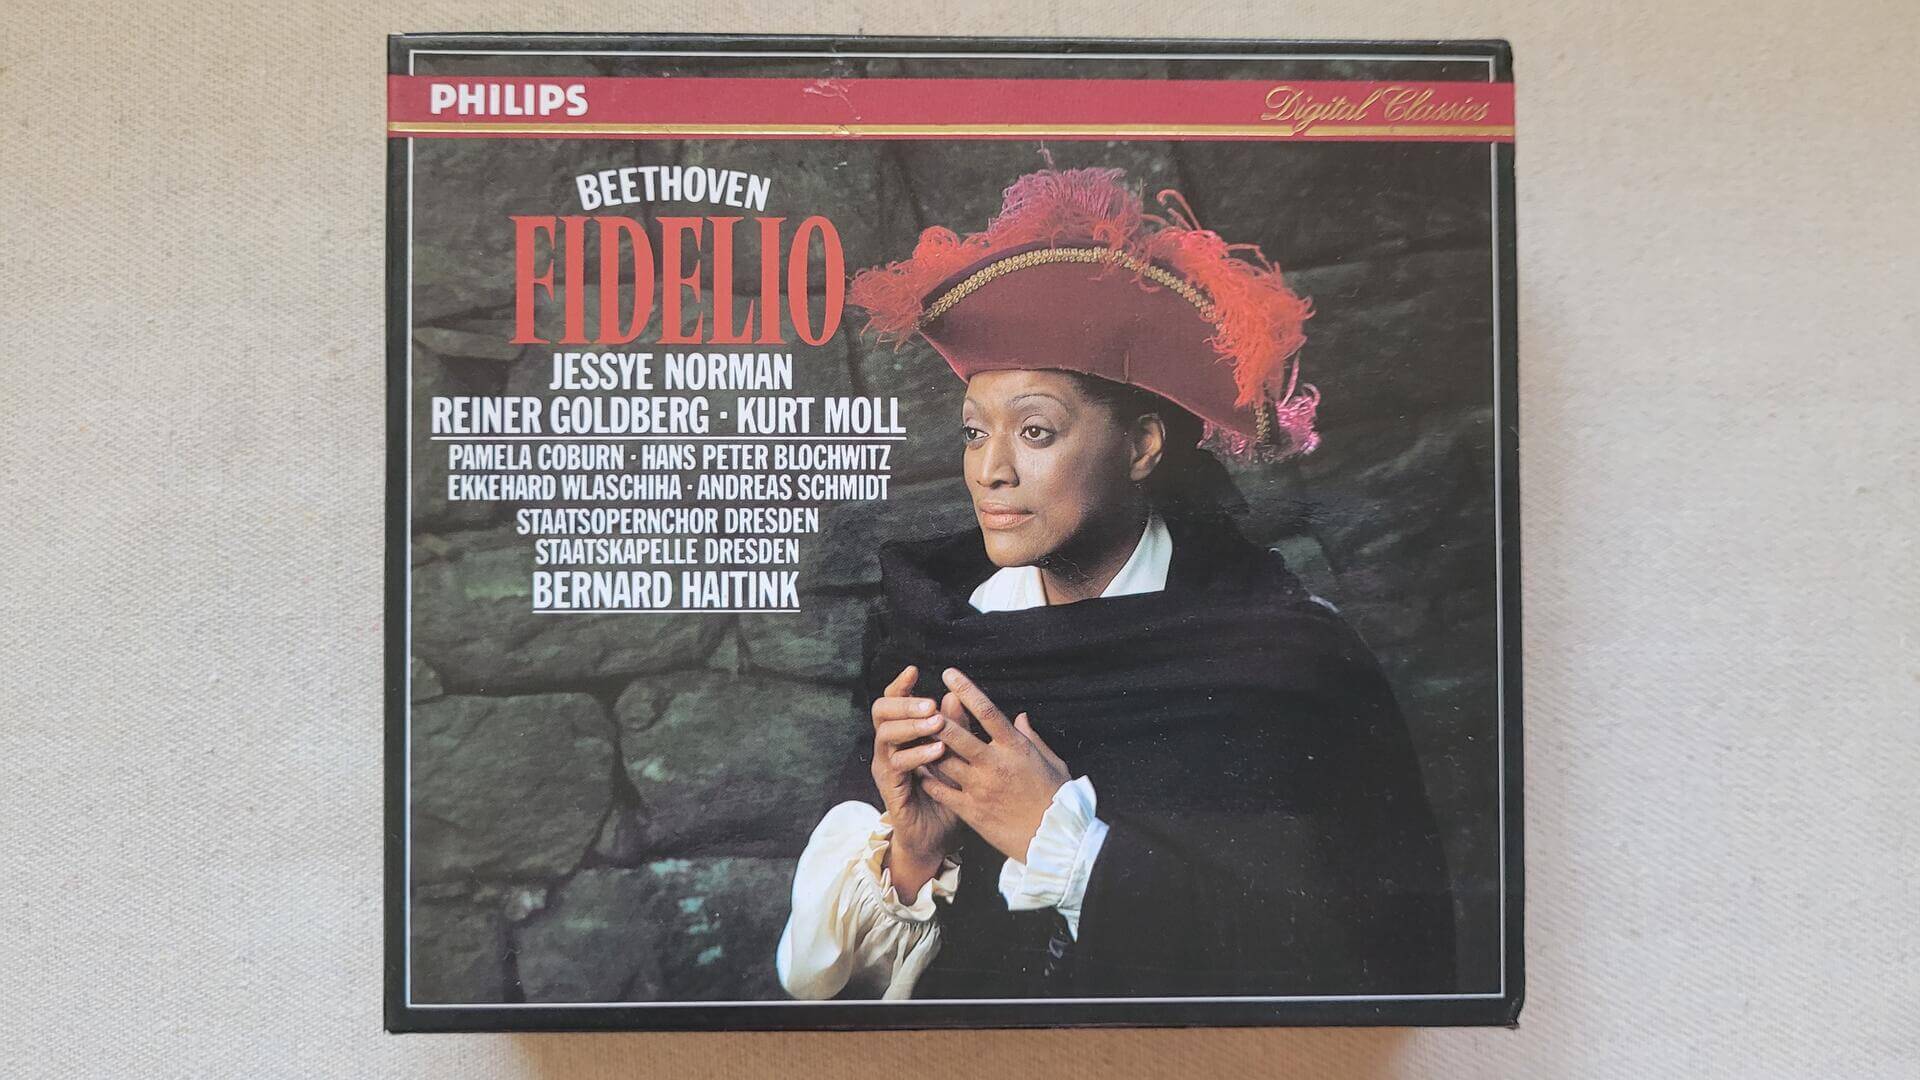 beethoven-fidelio-by-bernard-haitink-philips-digital-classics-2-cd-box-set-vintage-made-in-germany-collectible-music-compact-discs-opera-recording-front-cover